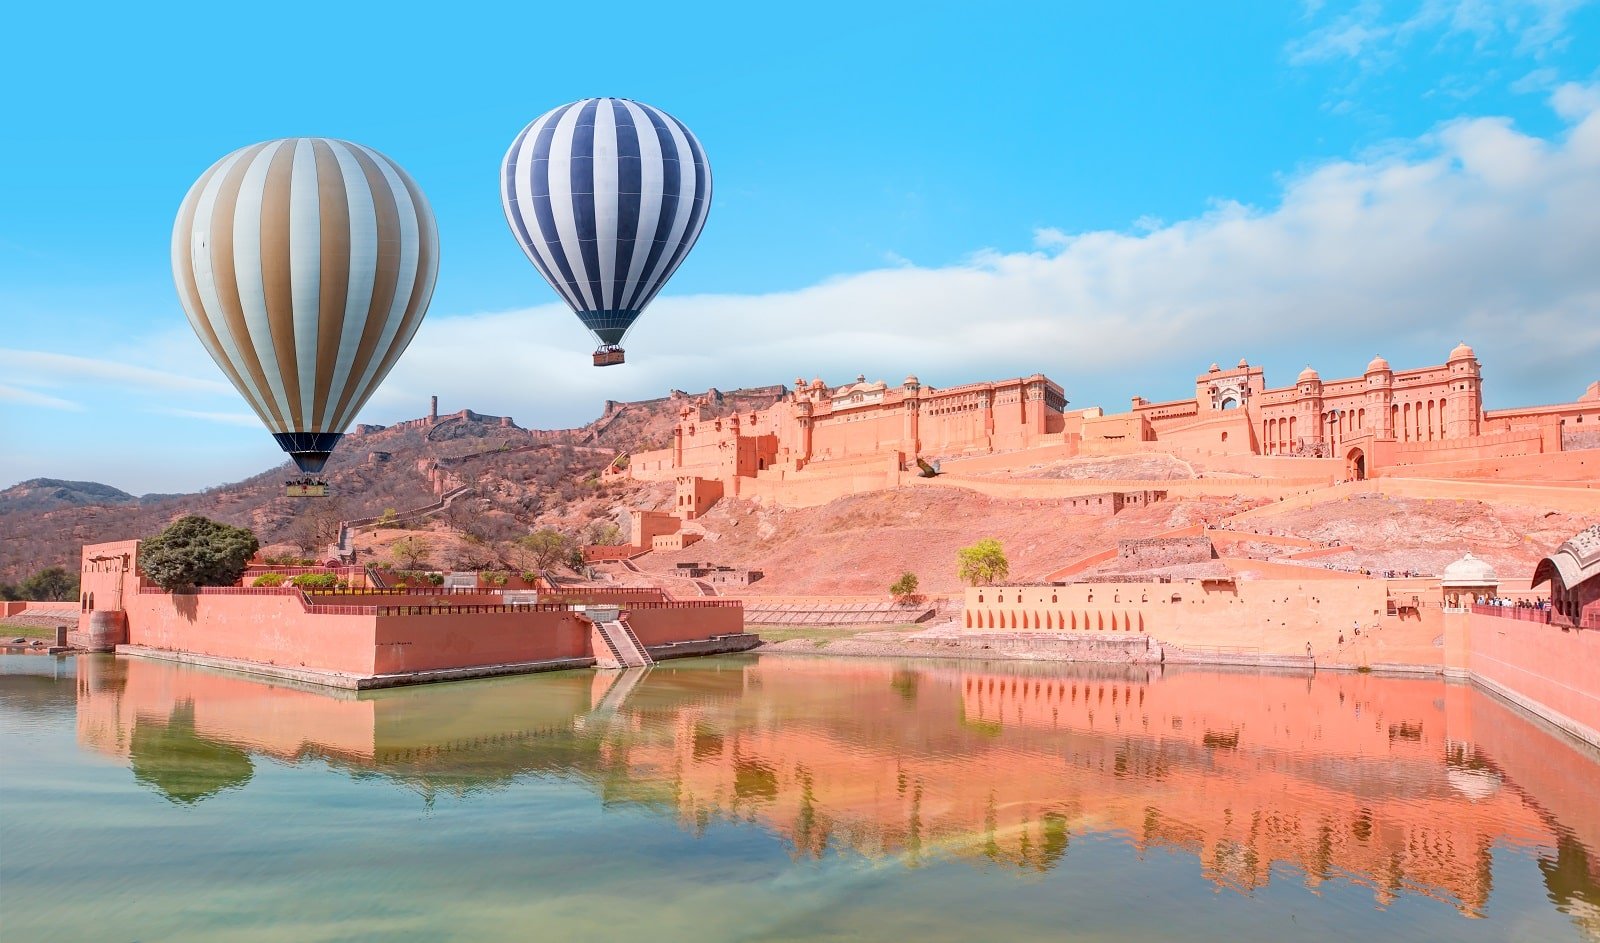 <p><span>Floating over Jaipur in a hot air balloon provides a unique perspective on this vibrant and historic city. The aerial view of majestic forts, palaces, and the sprawling cityscape is a blend of the ancient and the modern. The Amber Fort, with its imposing architecture, is particularly striking from above.</span></p> <p><span>The balloon ride at sunrise offers a tranquil experience, with the early light casting a soft glow over the city’s landmarks. This journey is not just about the views but also about experiencing the rich cultural tapestry of one of India’s most iconic cities.</span></p> <p><b>Insider’s Tip: </b><span>Combine your balloon ride with a visit to the Amber Fort for a full day of exploration. </span></p> <p><b>How to Get There: </b><span>Jaipur is well-connected by air and rail with major cities in India. Balloon tours typically depart from the outskirts of the city. </span></p> <p><b>When to Travel: </b><span>October to March, when the weather is cooler and more pleasant.</span></p>